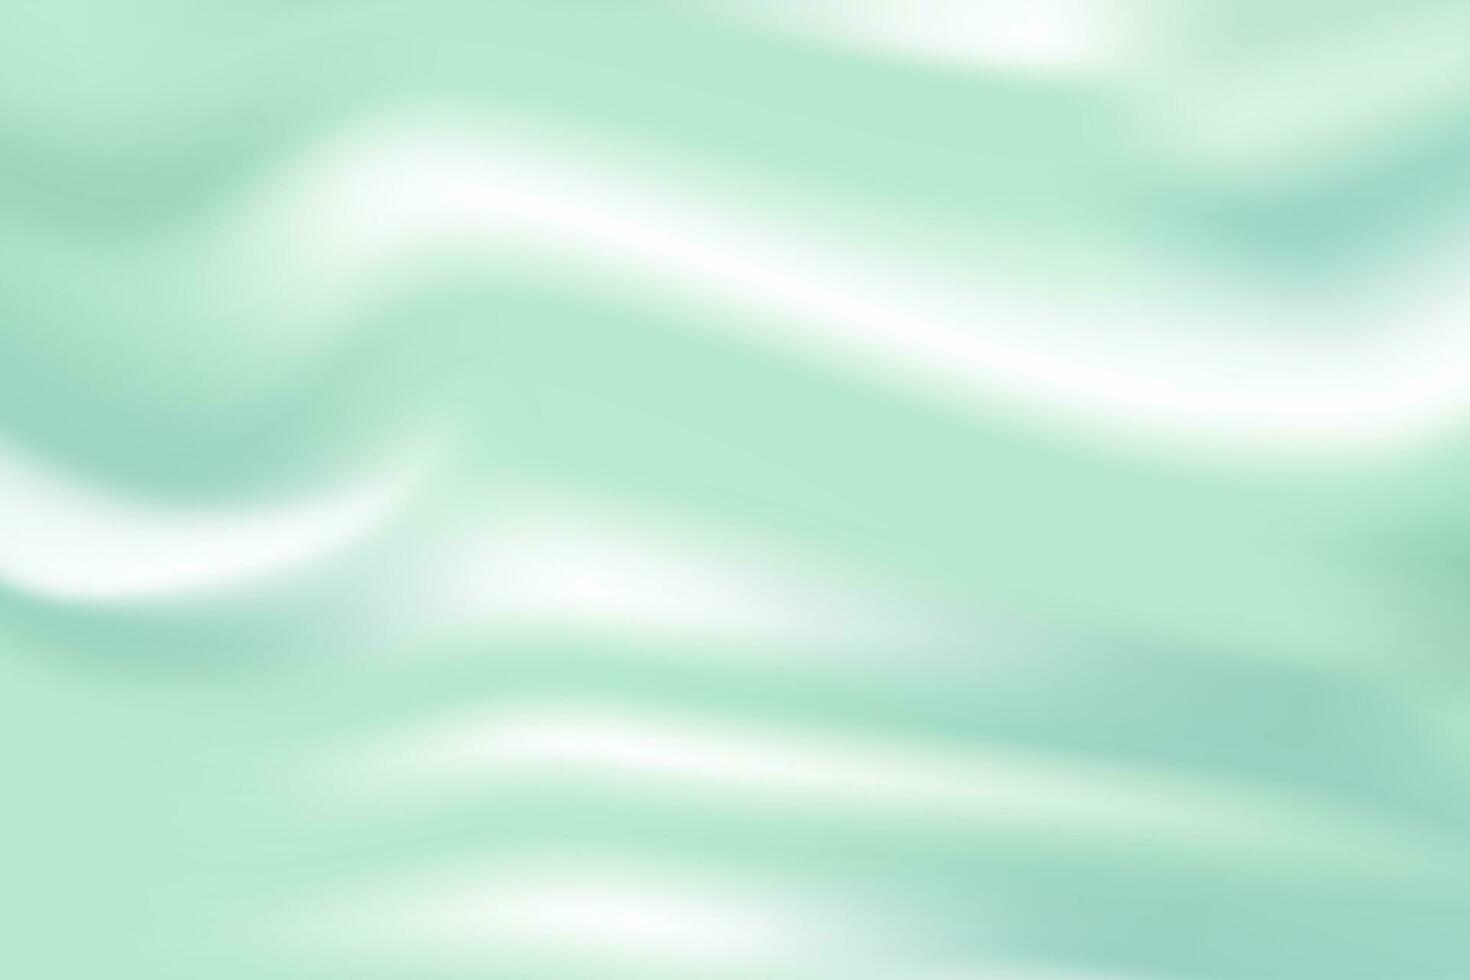 Monochromatic Light Green Gradient in colors of Teal, green, and peppermint. Vector Illustration. EPS 10.